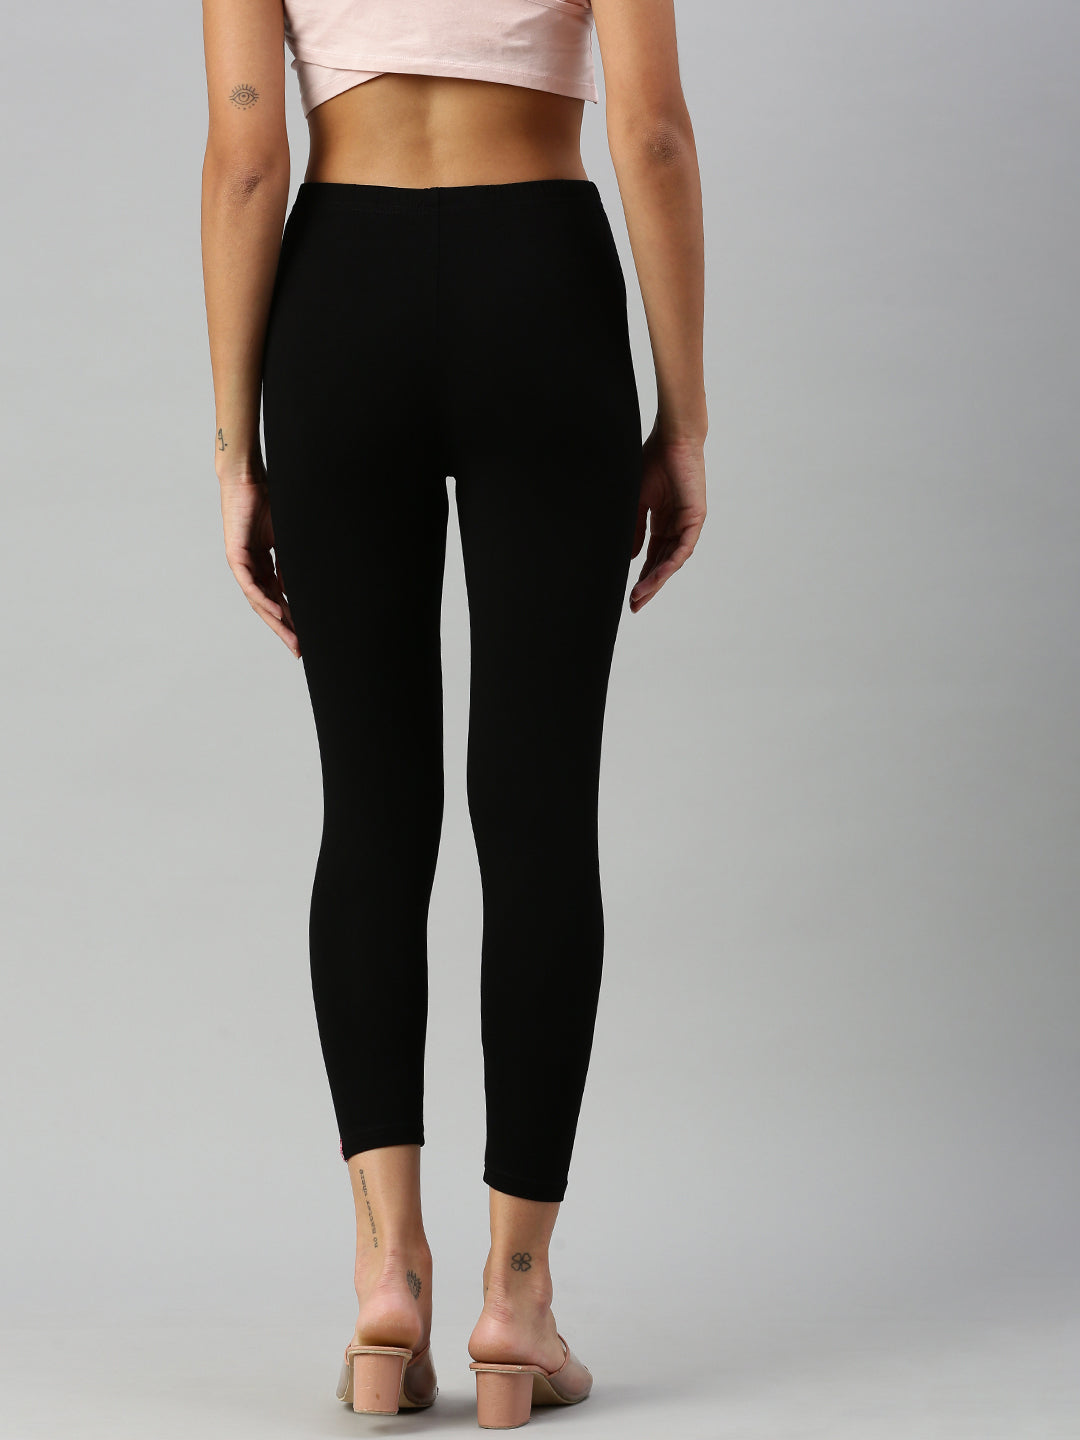 Prisma always has something new to offer its consumers. Get the latest  range of #leggings capri that is especially suita…